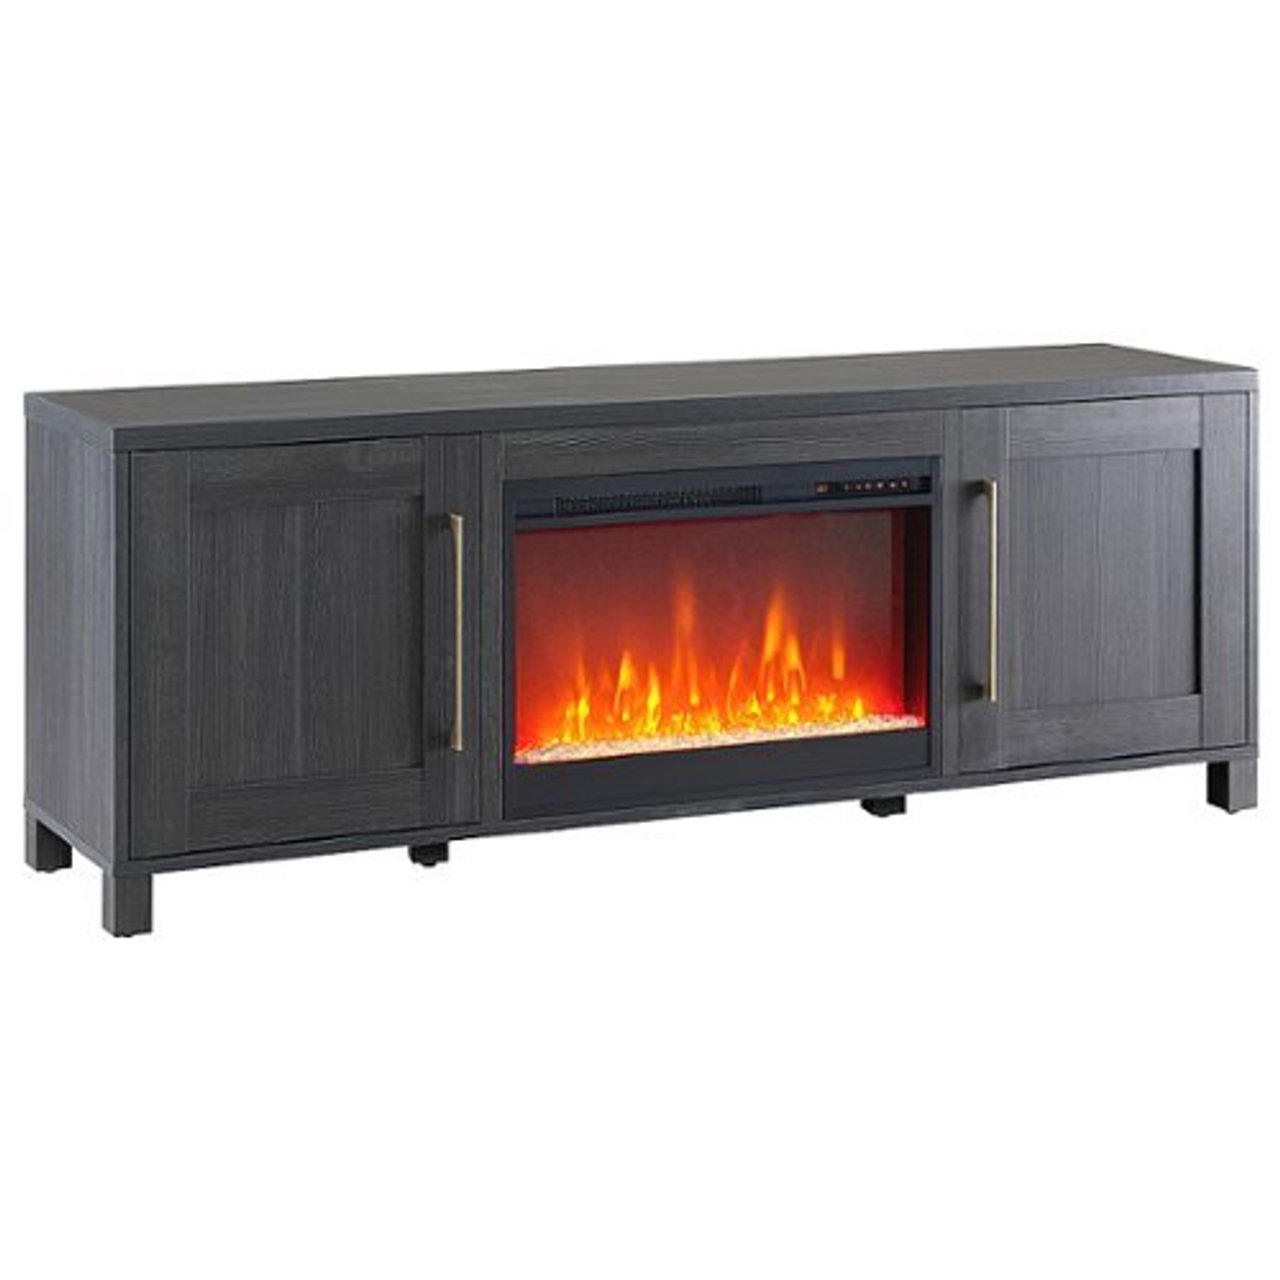 Camden&Wells - Chabot Crystal Fireplace TV Stand for TVs up to 80" - Charcoal Gray